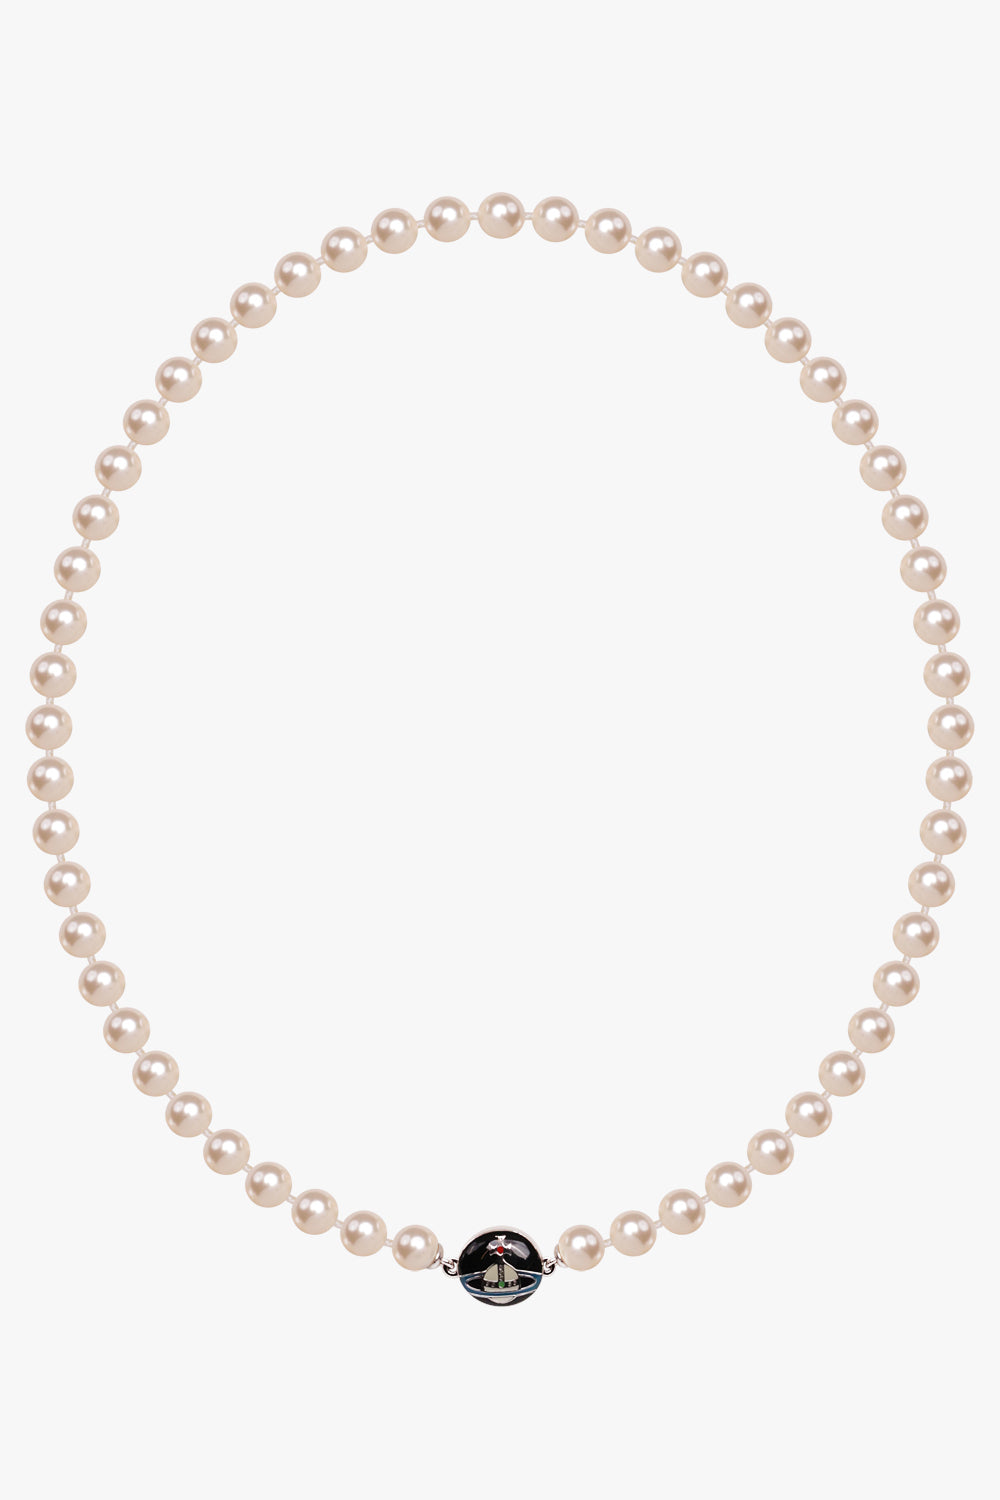 VIVIENNE WESTWOOD JEWELLRY SILVER / SILVER LOELIA PEARL NECKLACE | CREAM ROSE PEARL/SILVER